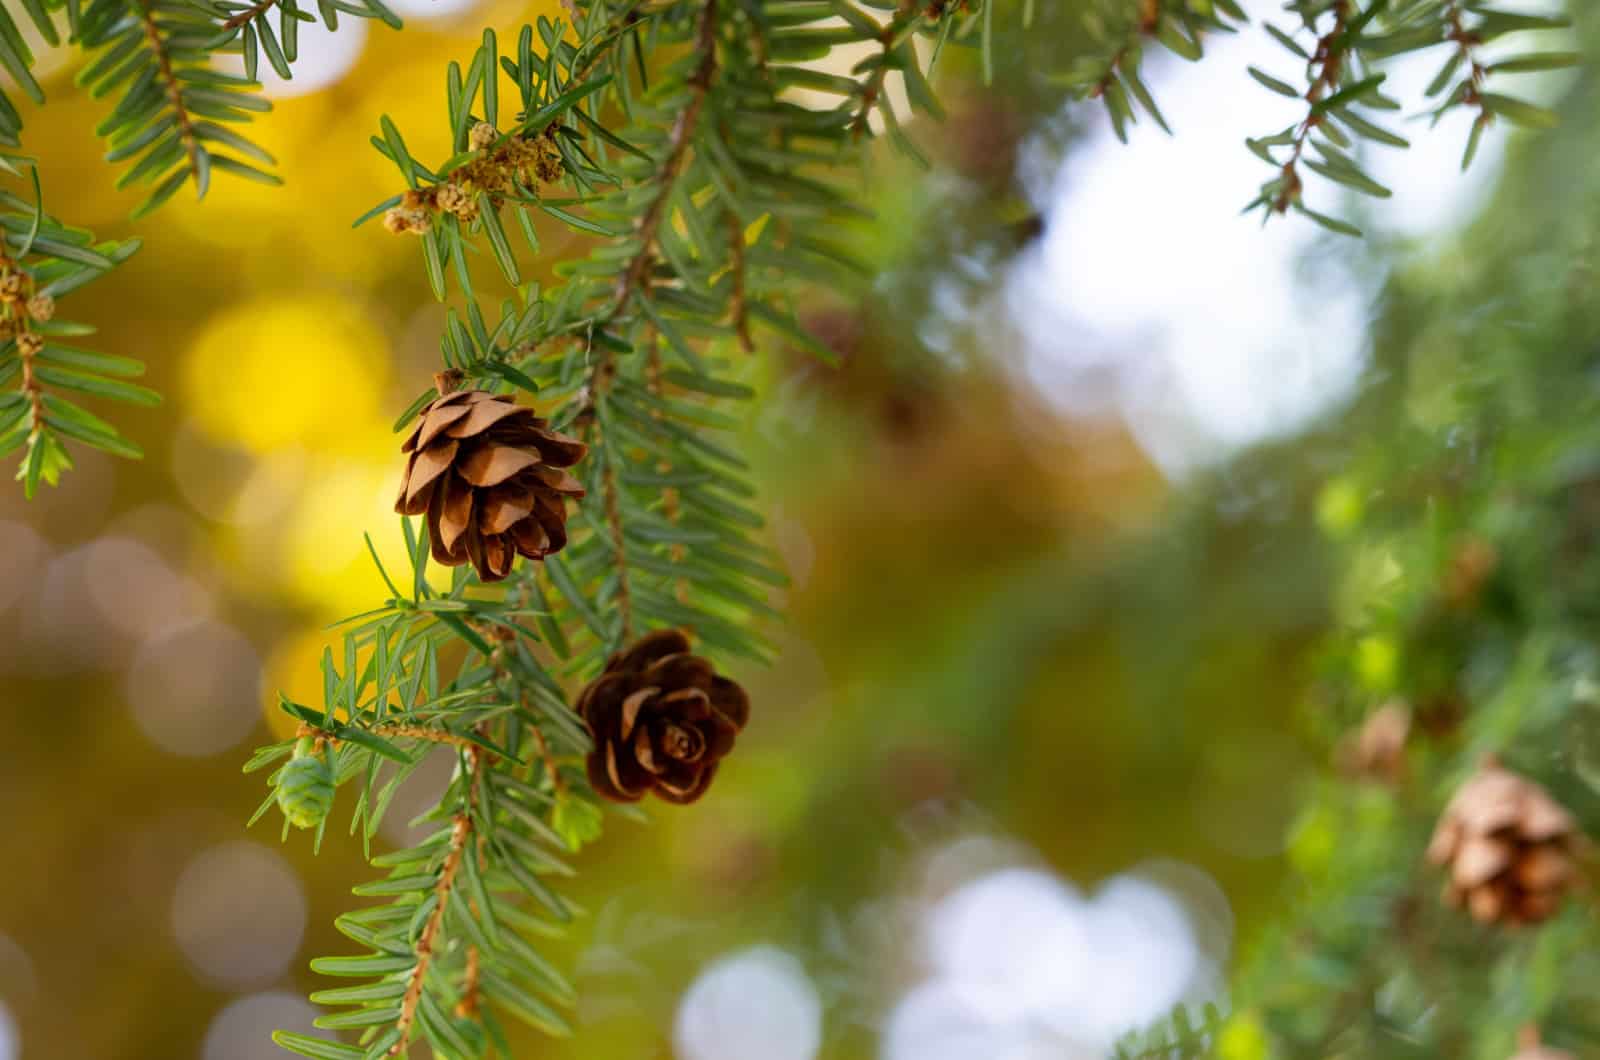 15 Shade Tolerant Evergreen Trees And Shrubs + Care Guides